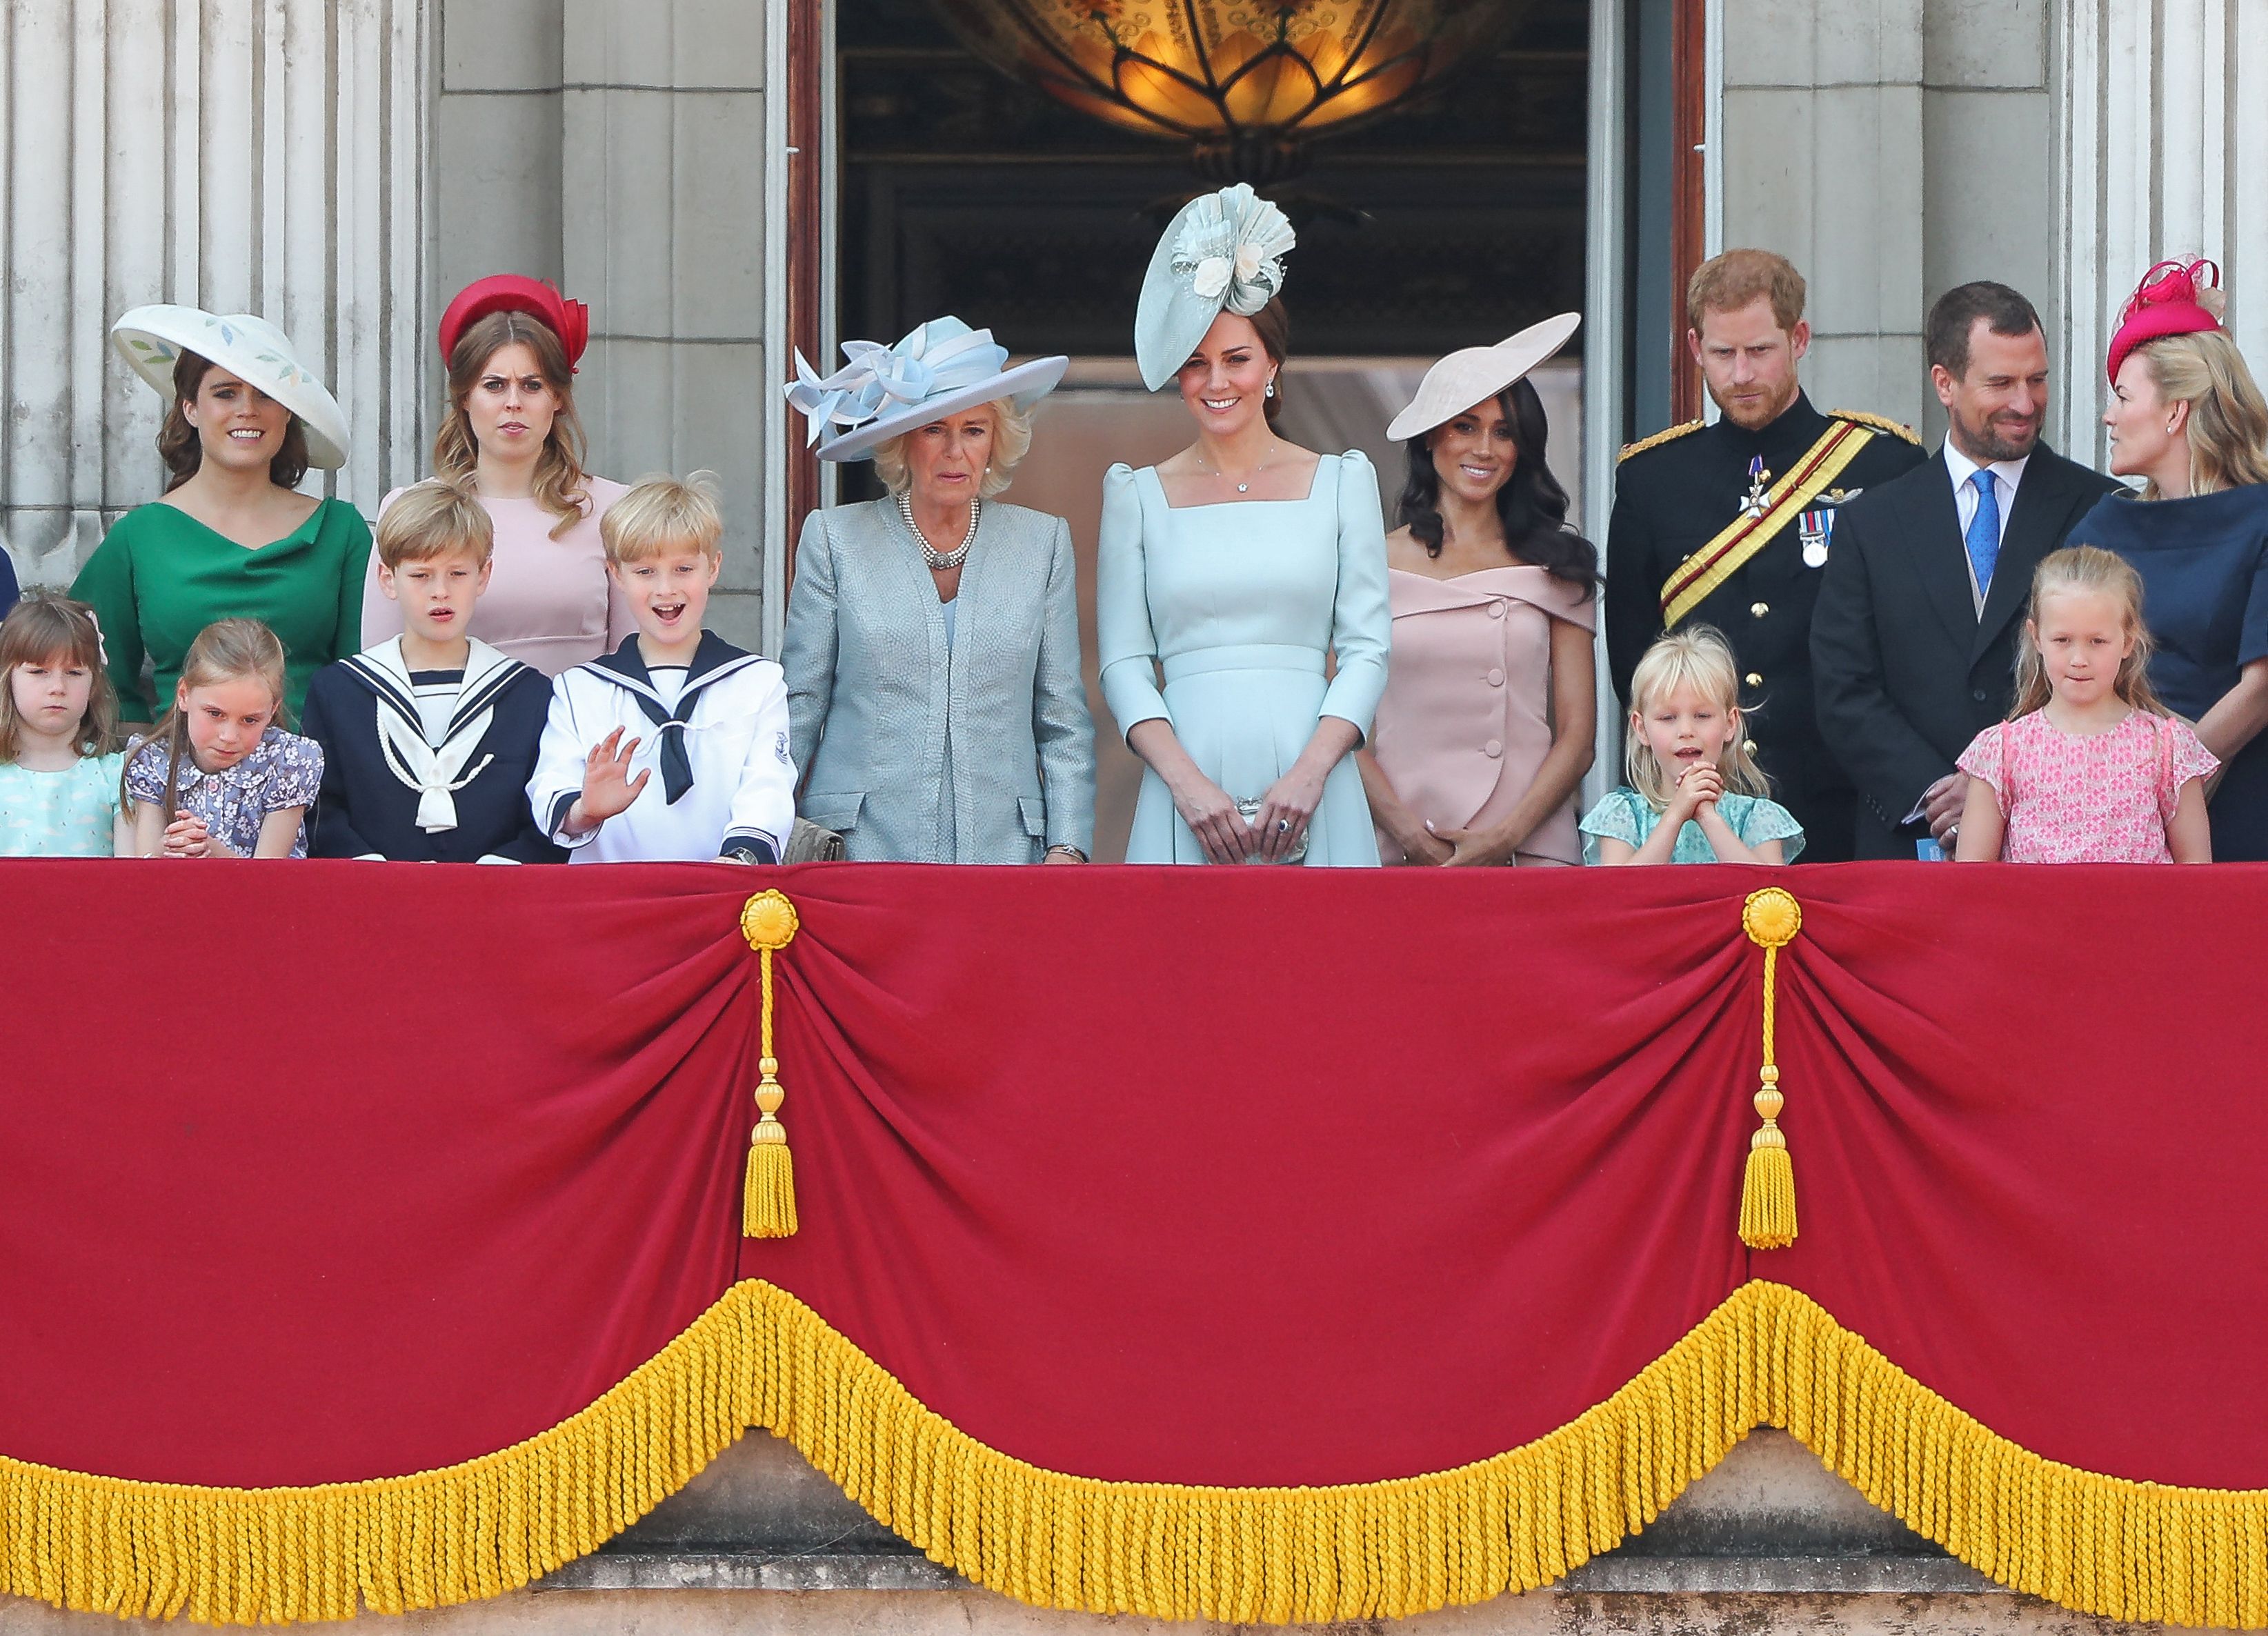 Some members of the royal family gather on the iconic balcony at Buckingham Palace